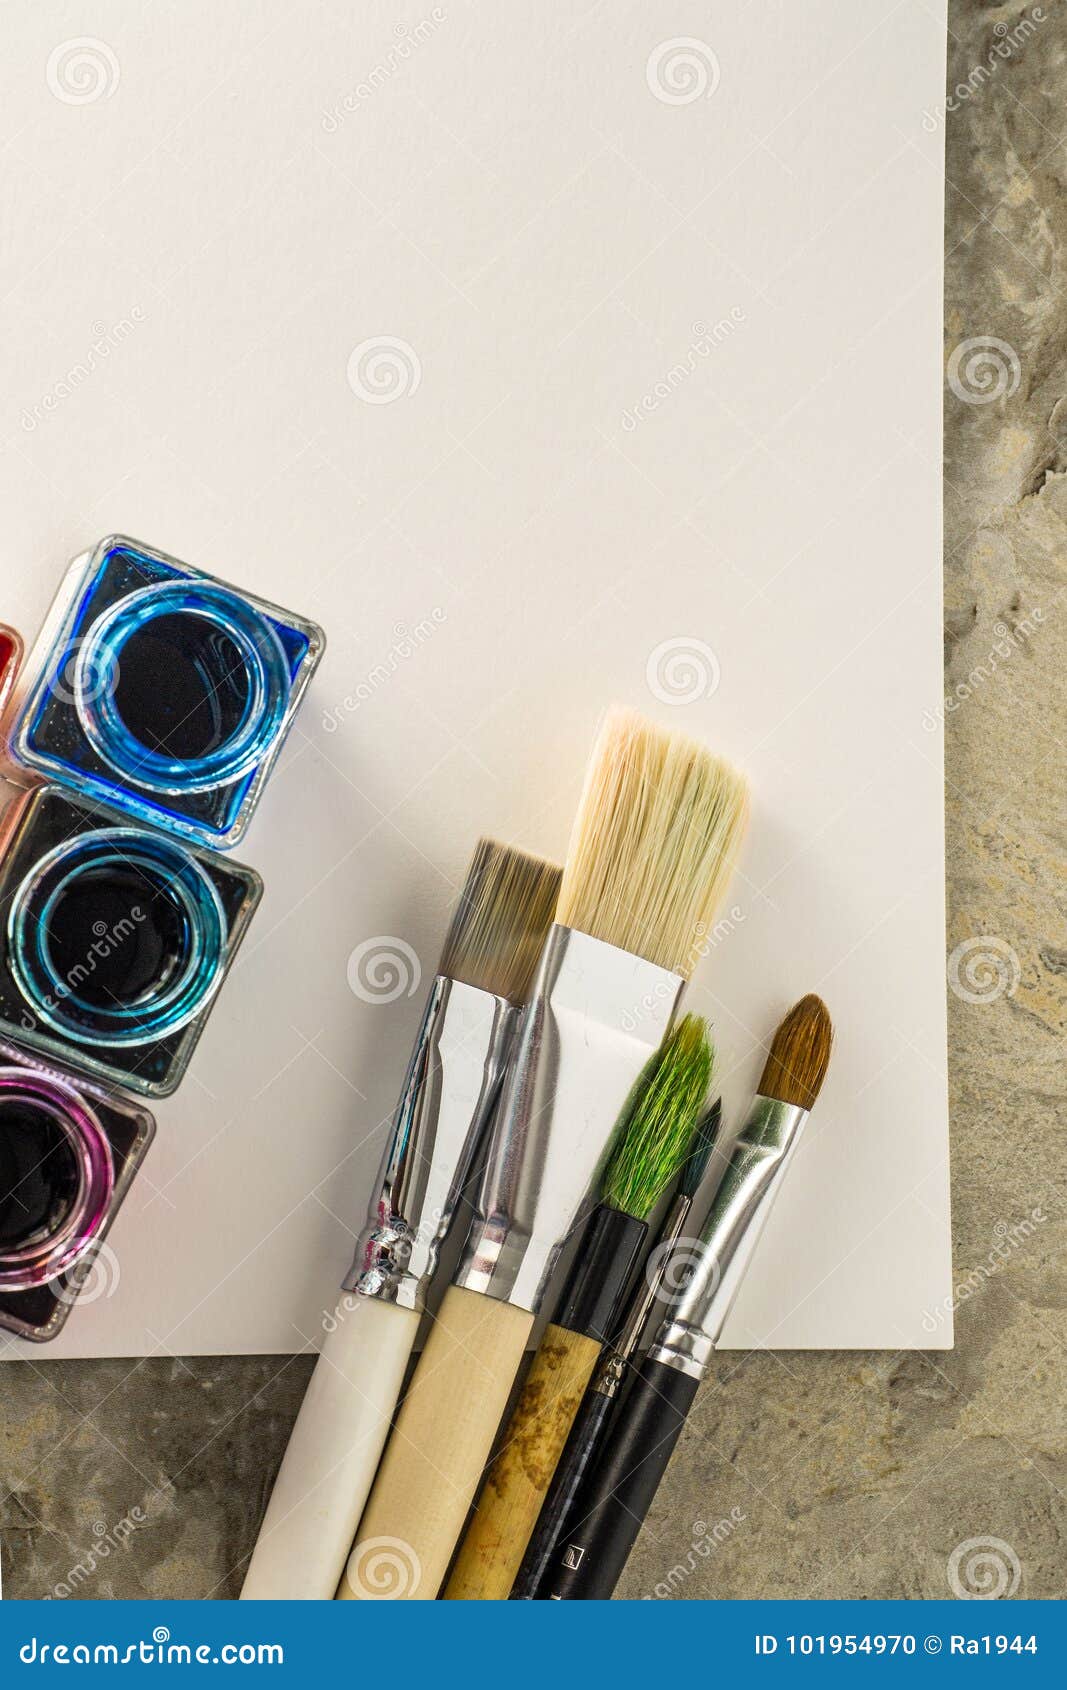 Paint Brushes, Acrylic Paint on a White Paper for Drawing Stock Photo ...